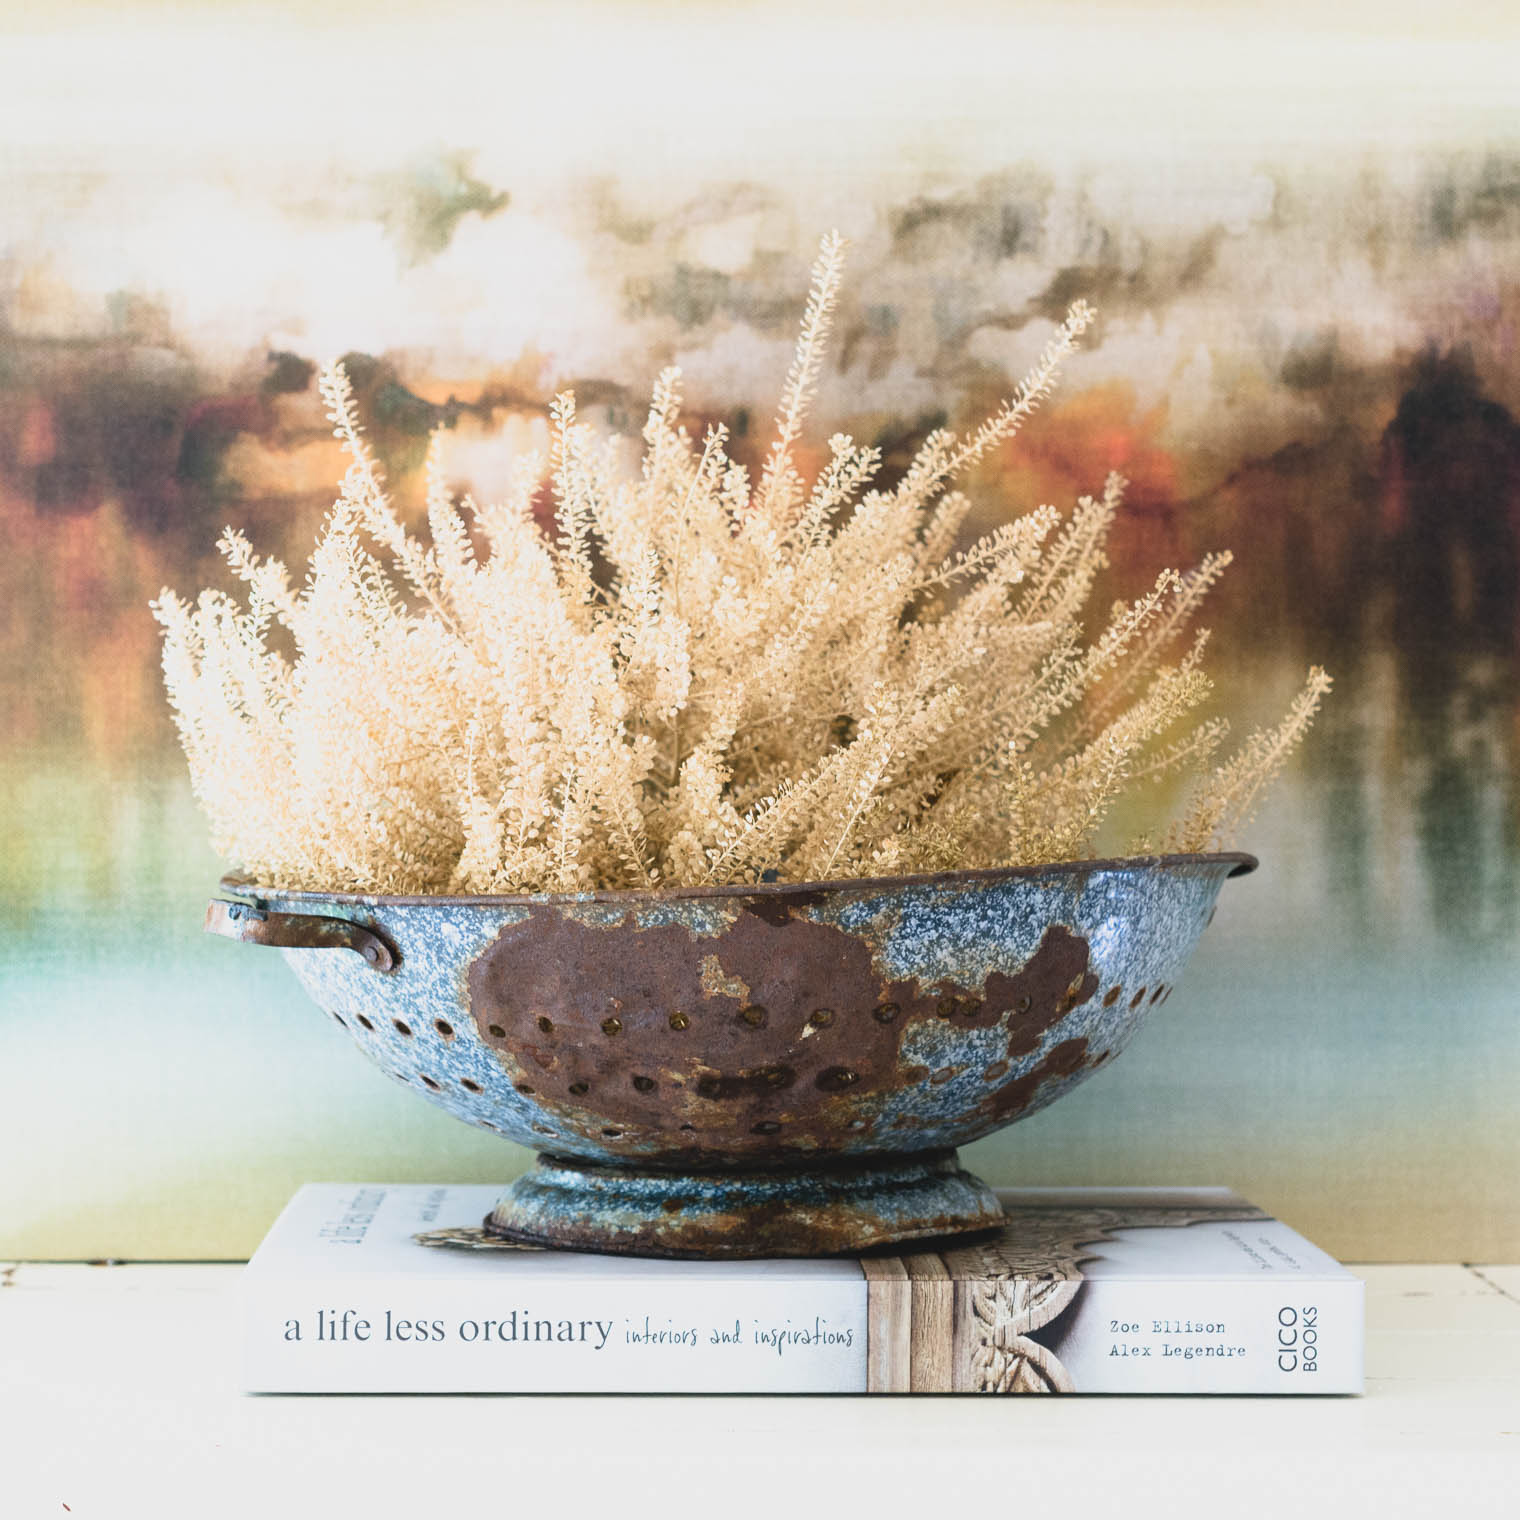 Sunday Sundries, Vintage Colander, Wildflowers, Keeping With the Times